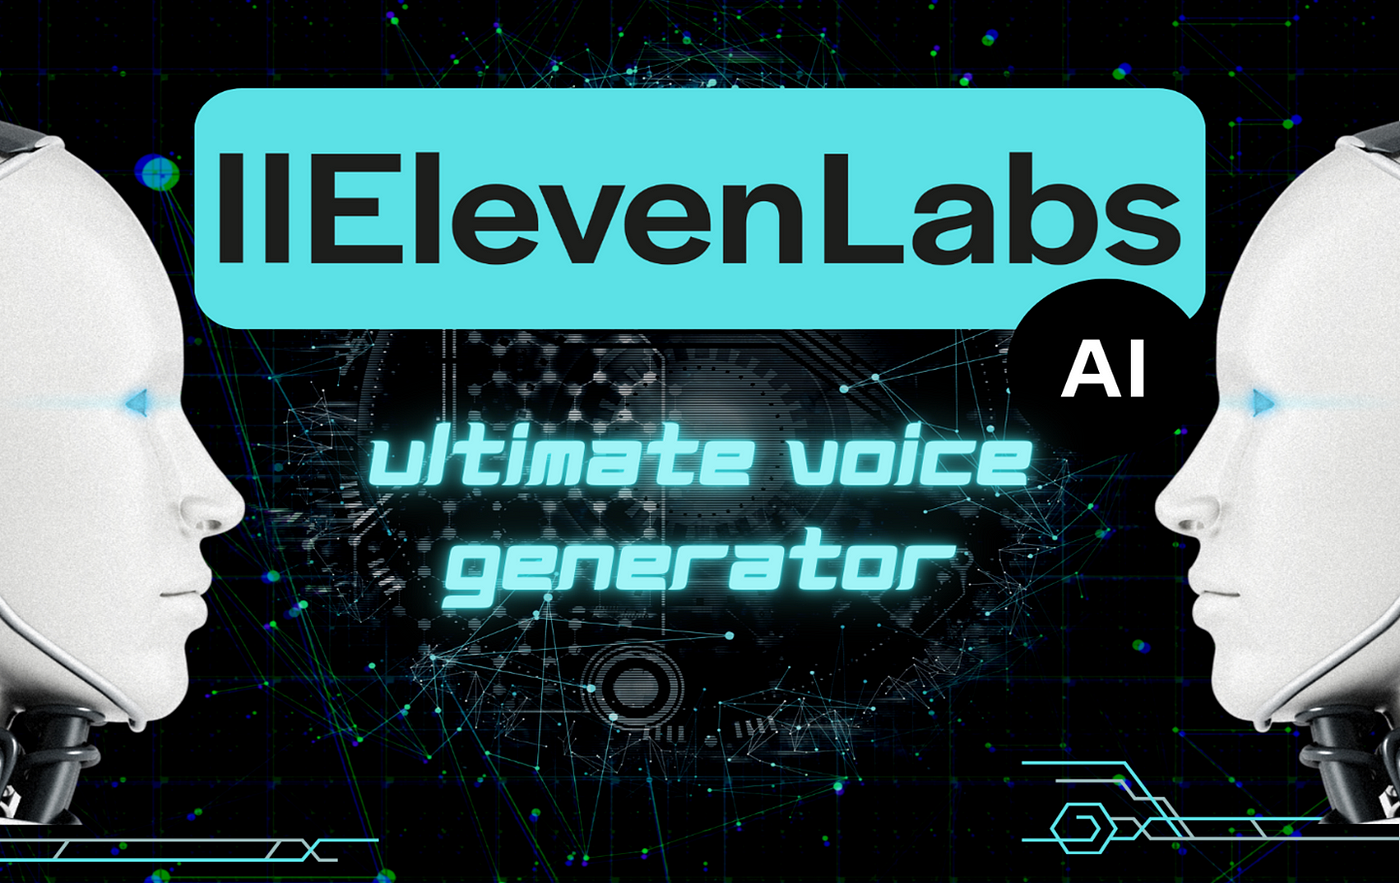 ElevenLabs AI: Is This AI Voice Generator Worth it?